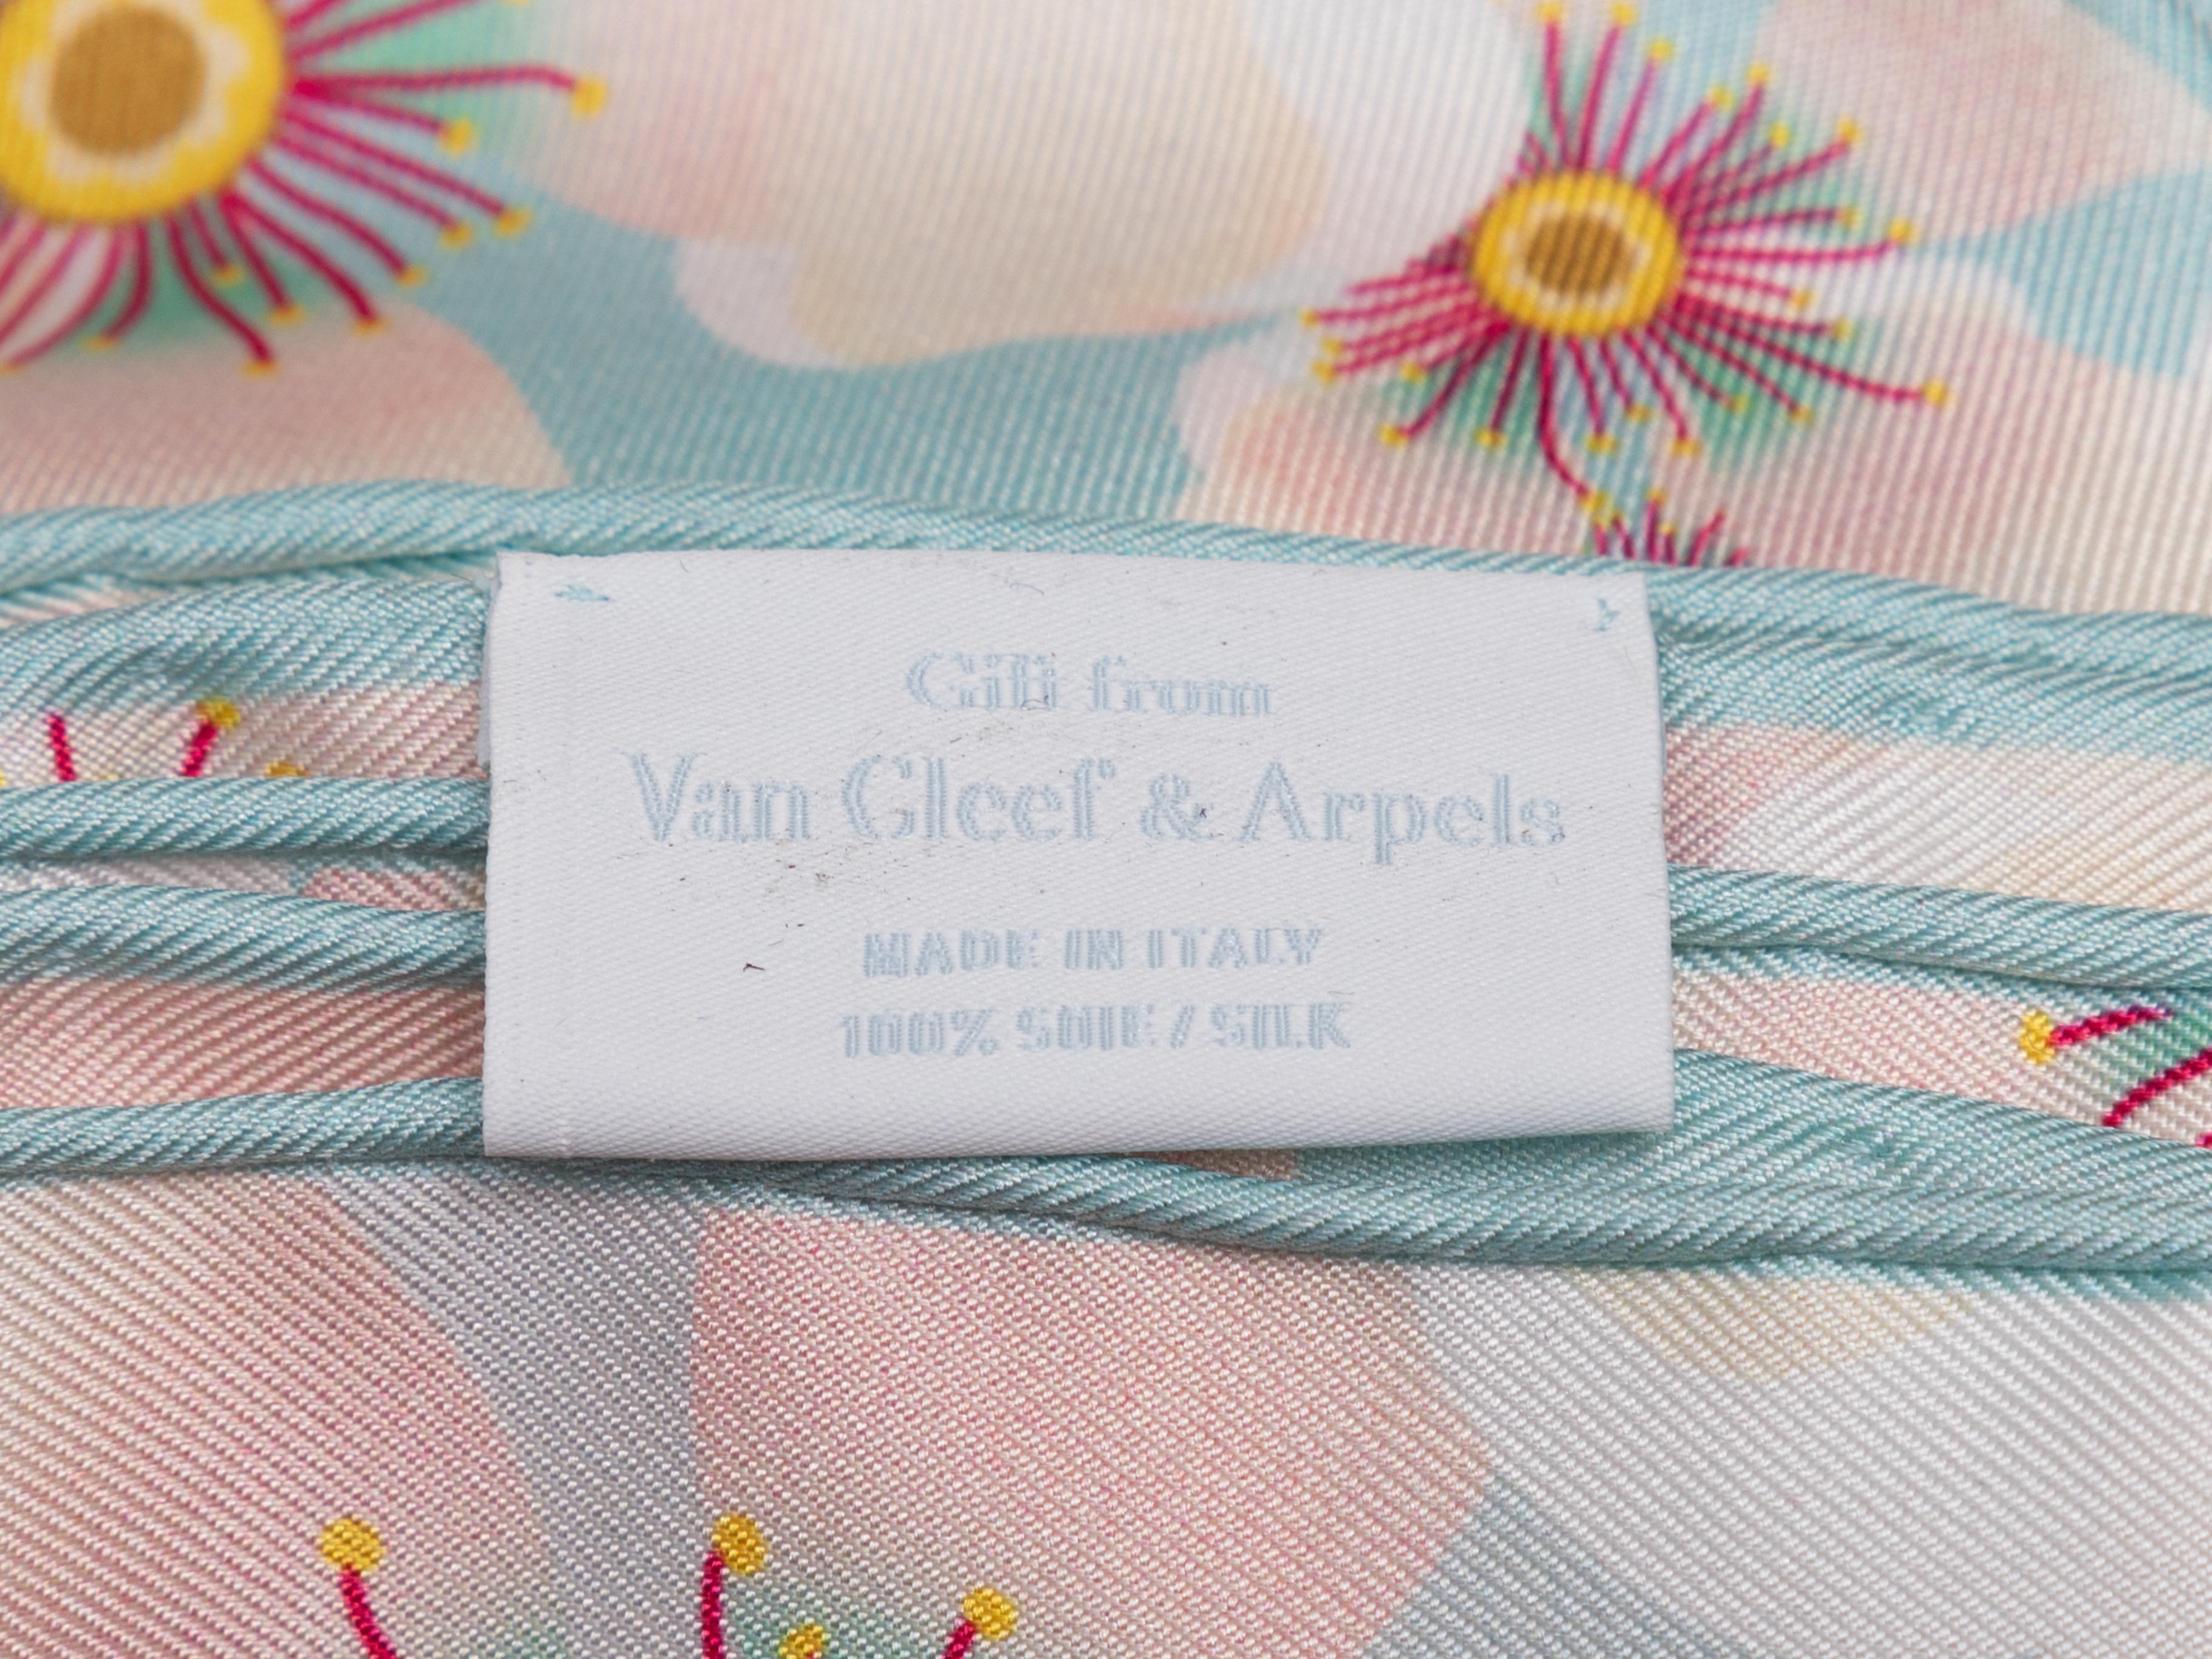 Product Details: Light pink and multiclor floral print silk scarf by Van Cleef and Arpels x Charlotte Gastaut. 34.5